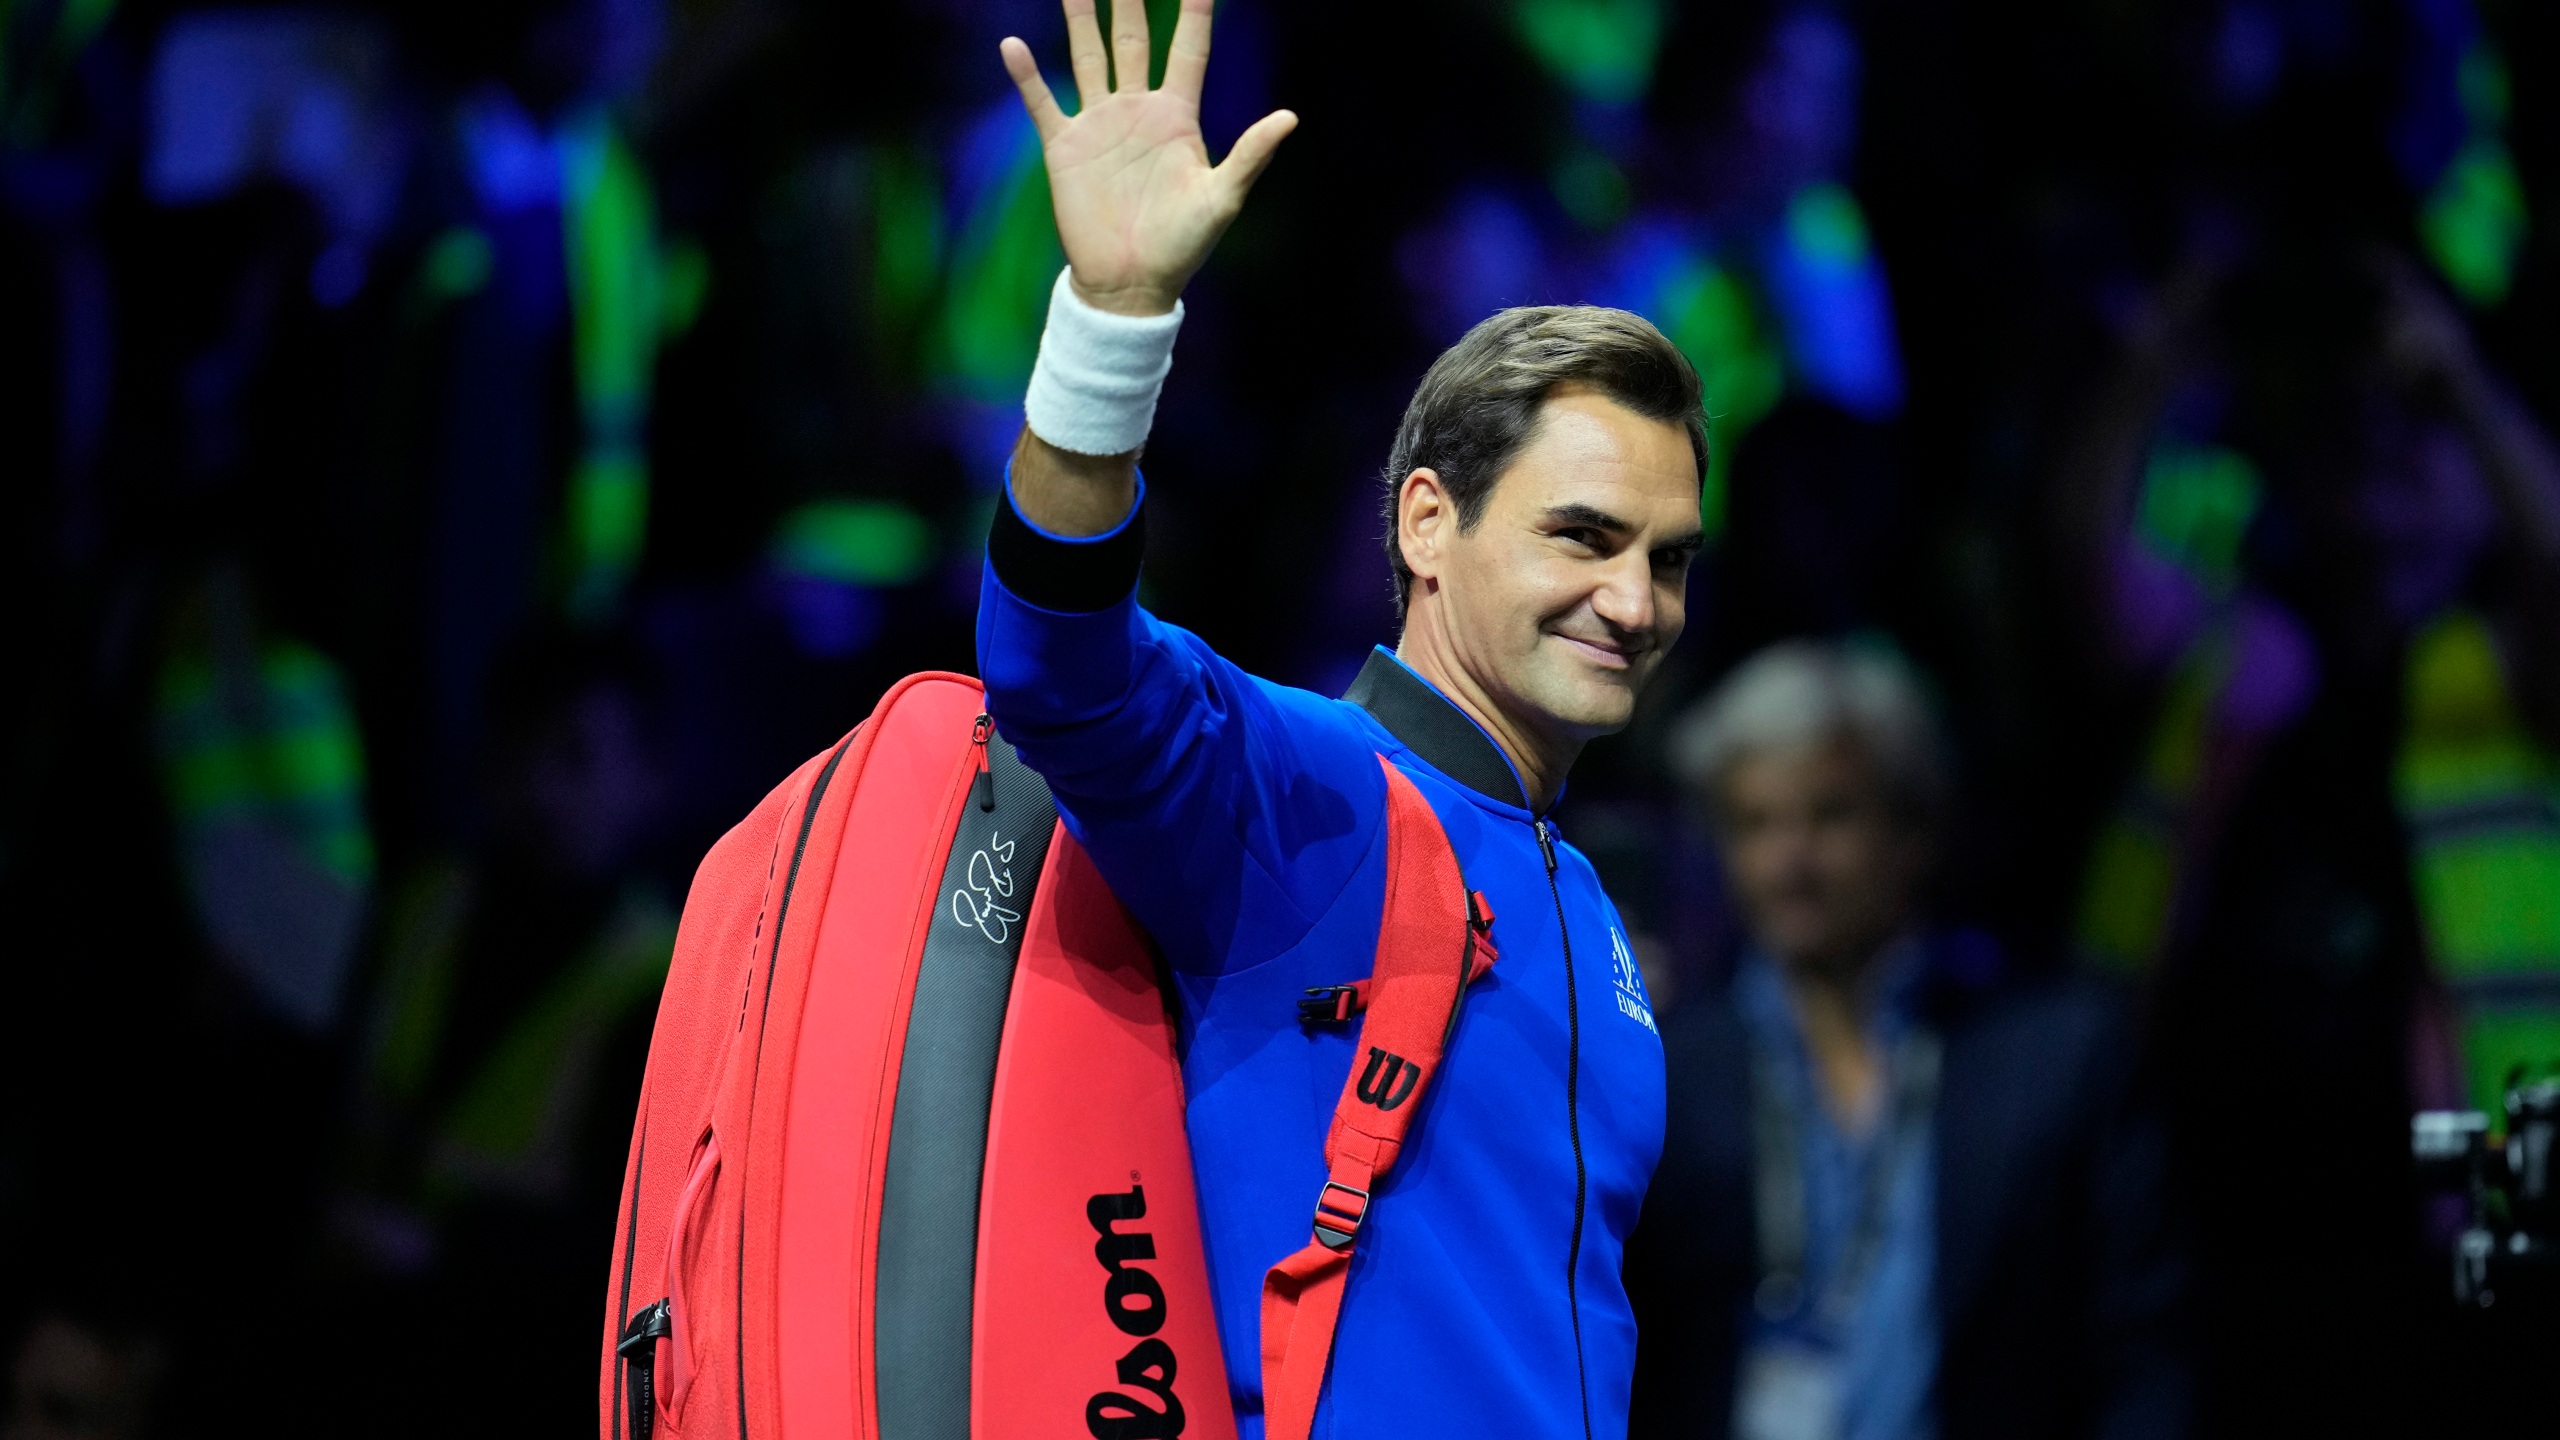 Federer To AP: Tennis Will Withstand Big Name Retirements